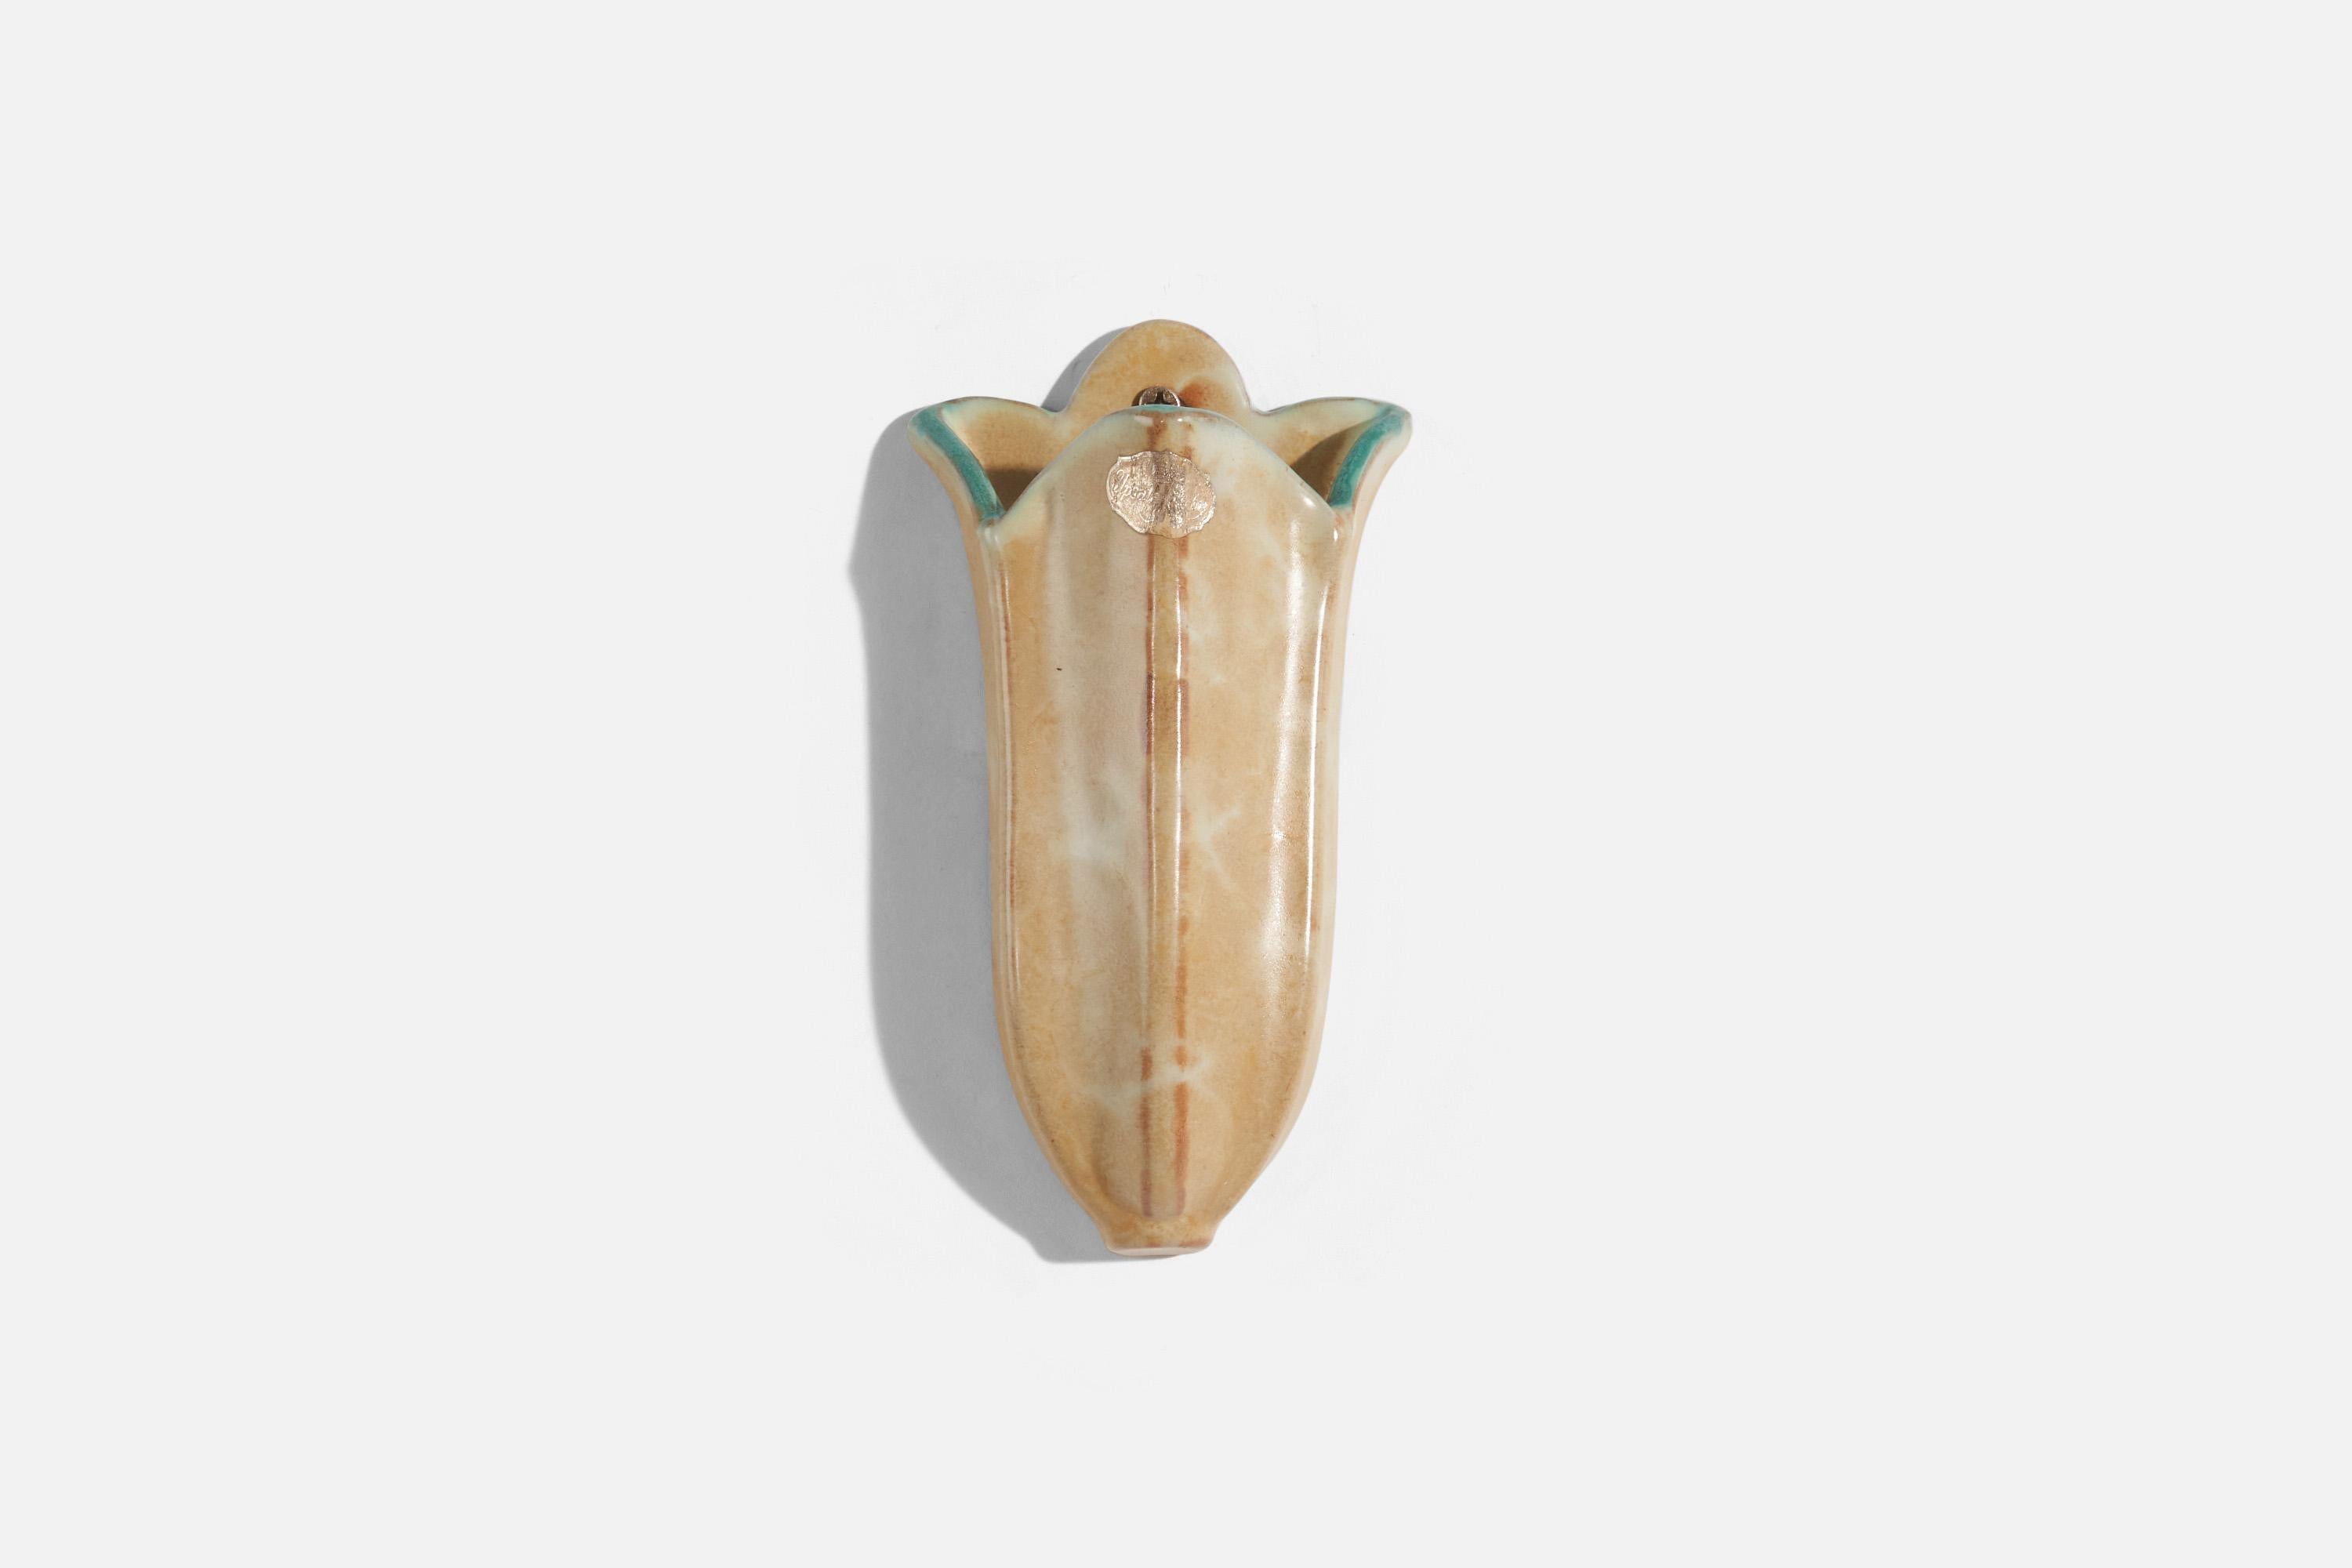 A beige and green, glazed earthenware wall plant holder designed and produced by Upsala-Ekeby, Sweden, c. 1940s.

